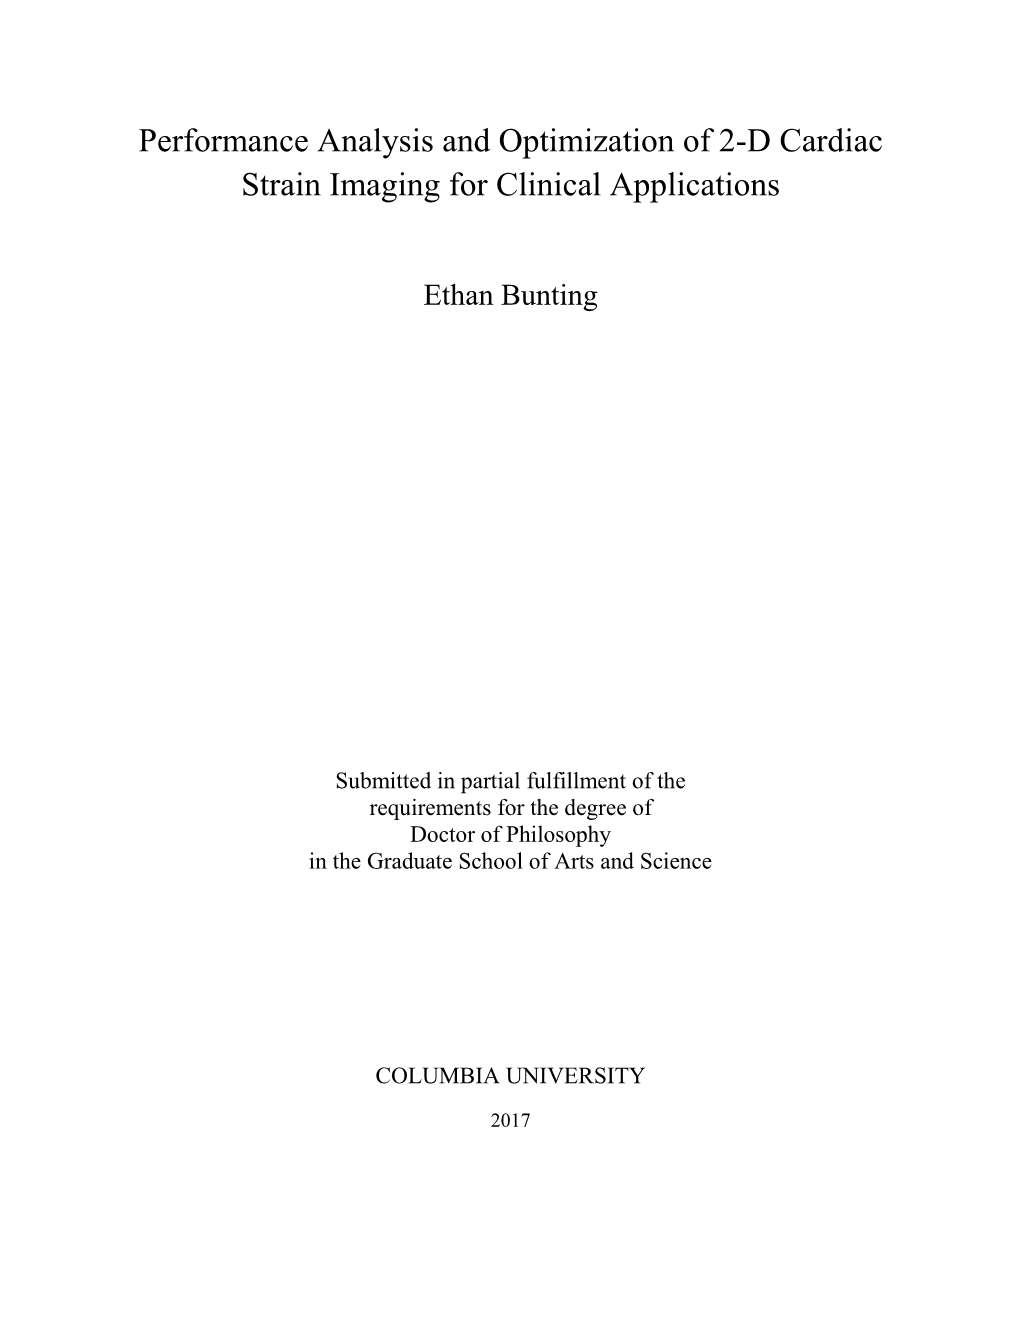 Performance Analysis and Optimization of 2-D Cardiac Strain Imaging for Clinical Applications